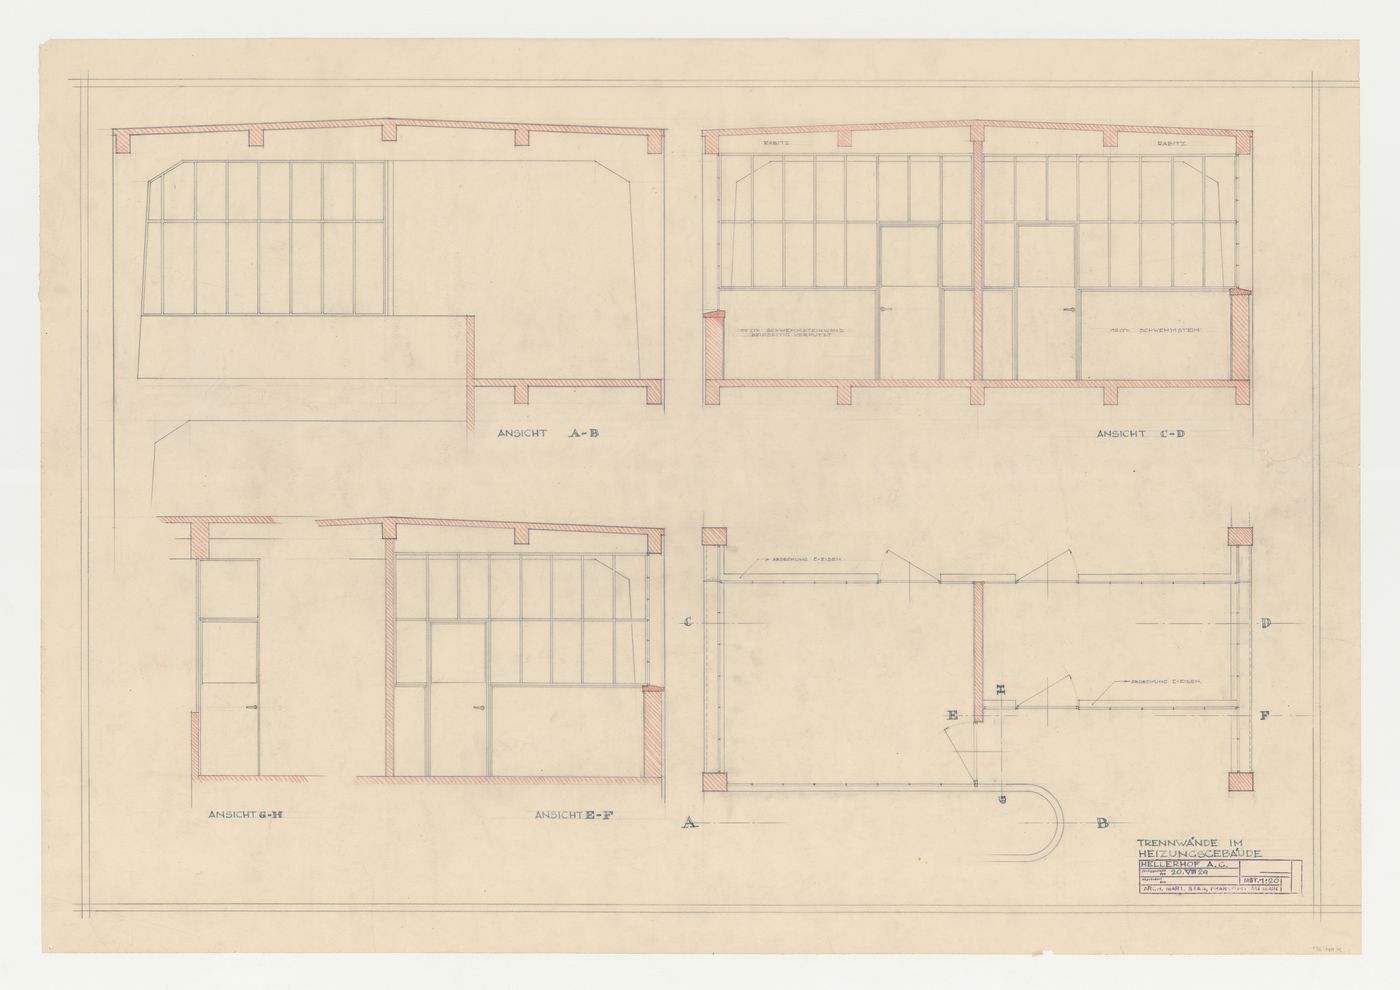 Plan and sections for the heating systems building, Hellerhof Housing Estate, Frankfurt am Main, Germany